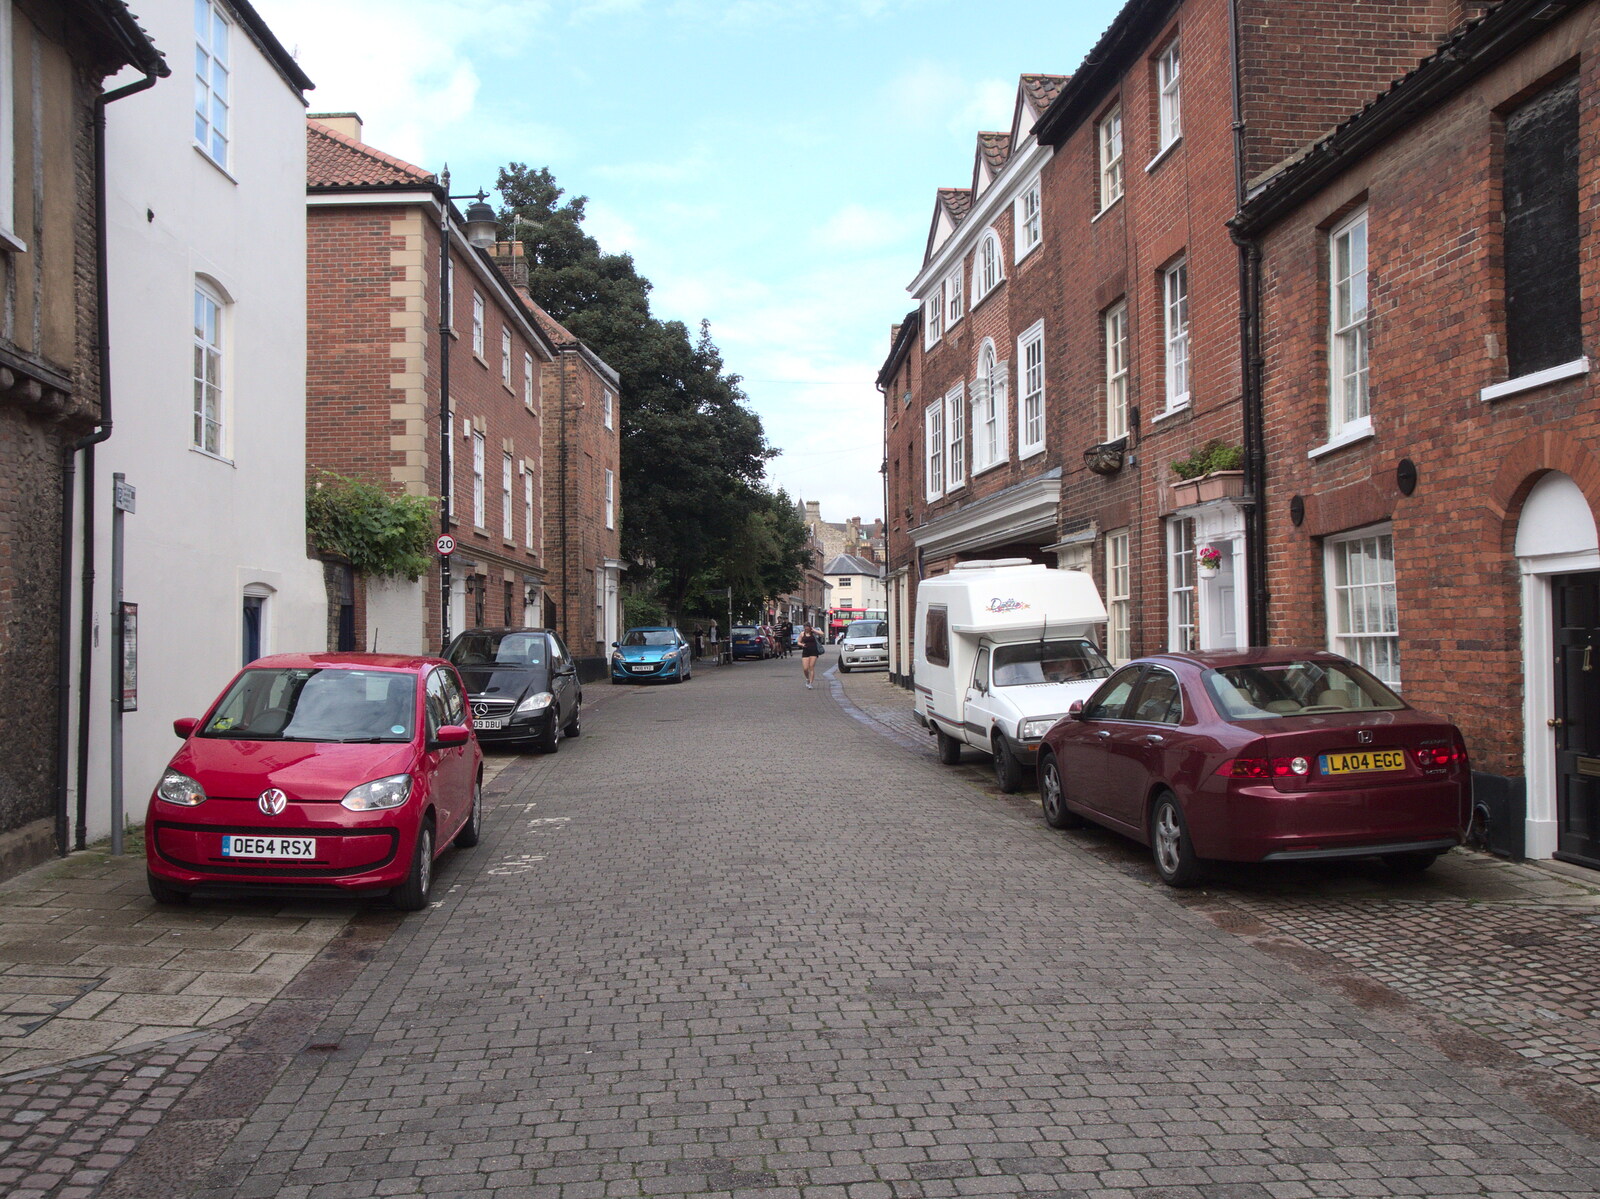 The cobbles of King Street from Head Out Not Home: A Music Day, Norwich, Norfolk - 22nd August 2021